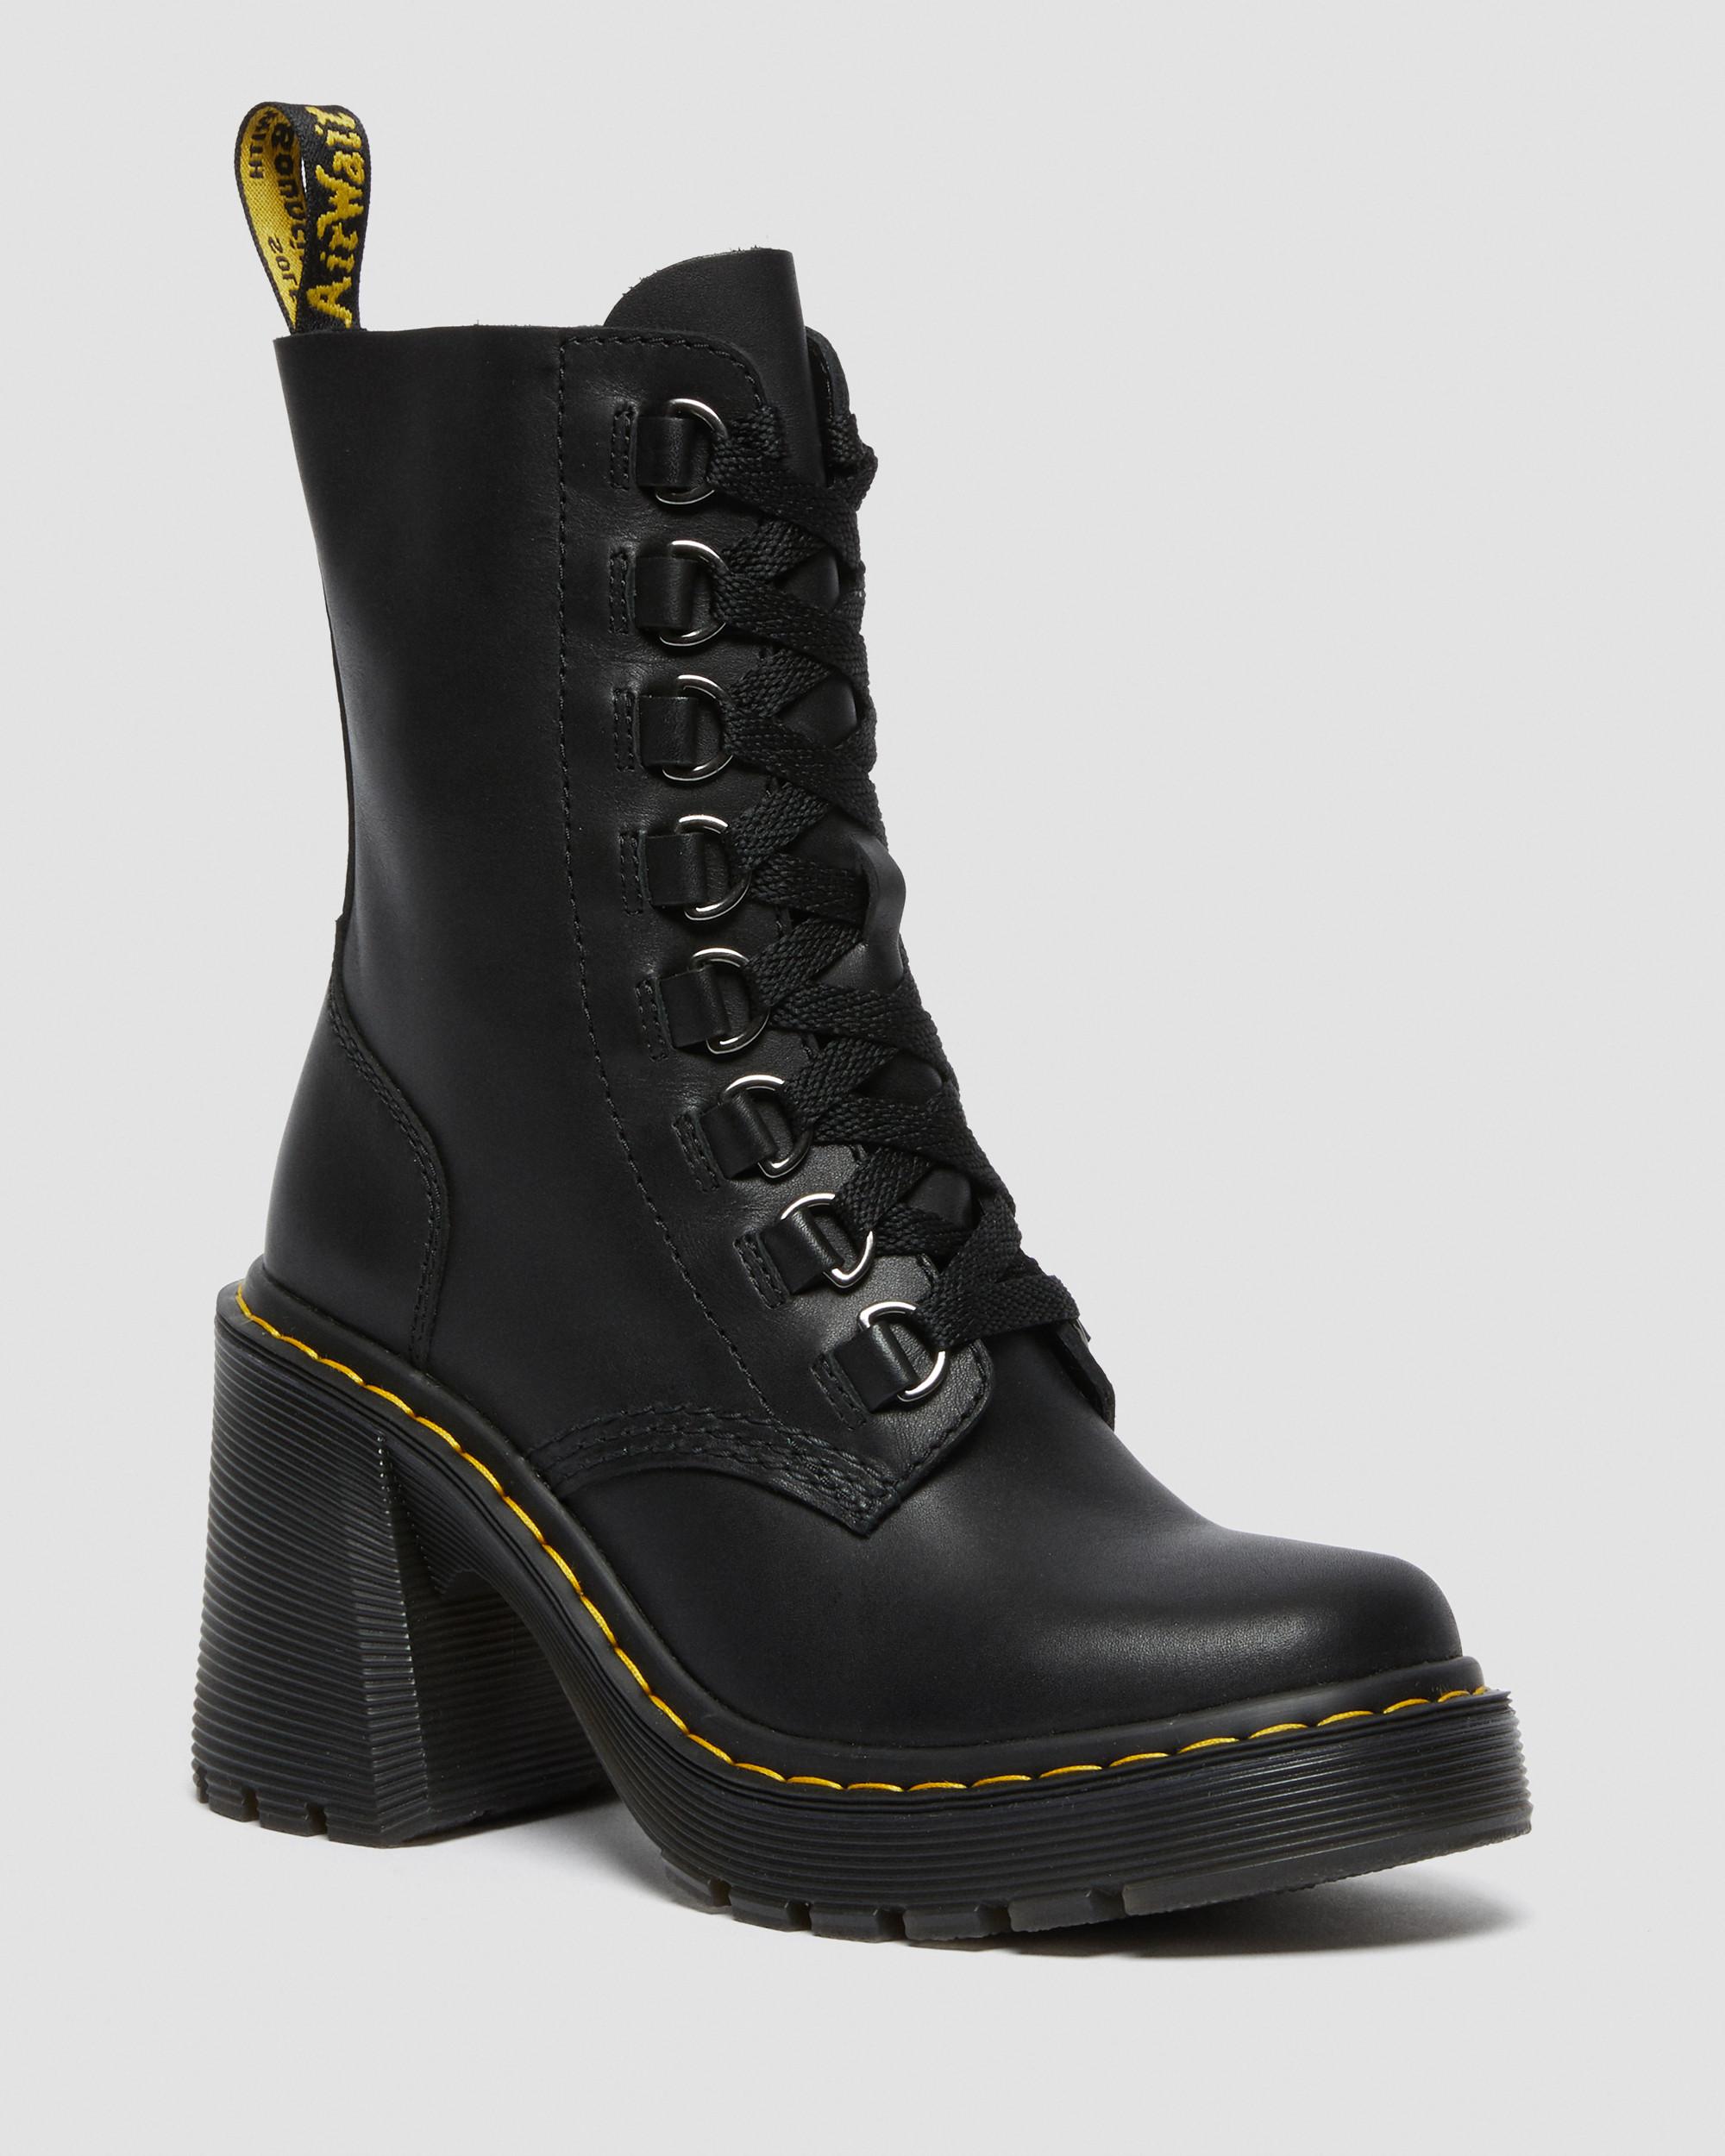 Chesney Leather Flared Heel Lace Up Boots in Black | Dr. Martens